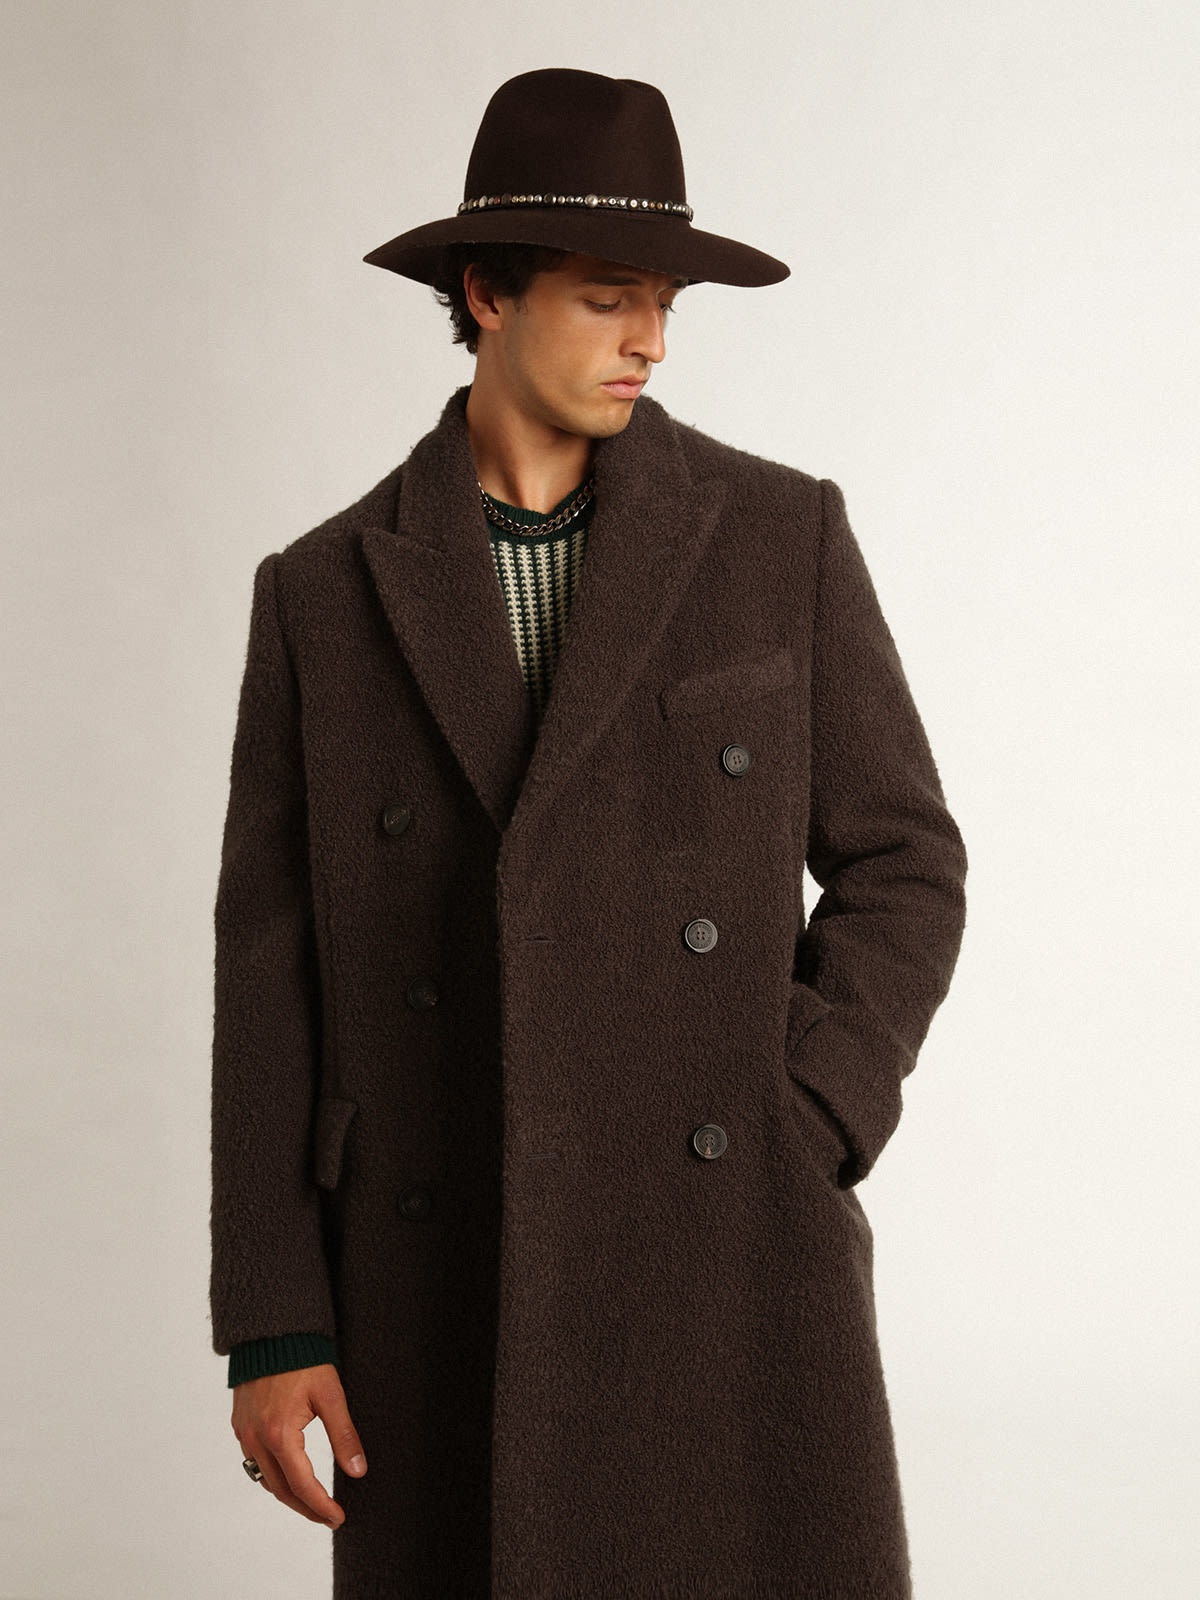 Men's double-breasted coat in licorice-colored bouclé wool - 2